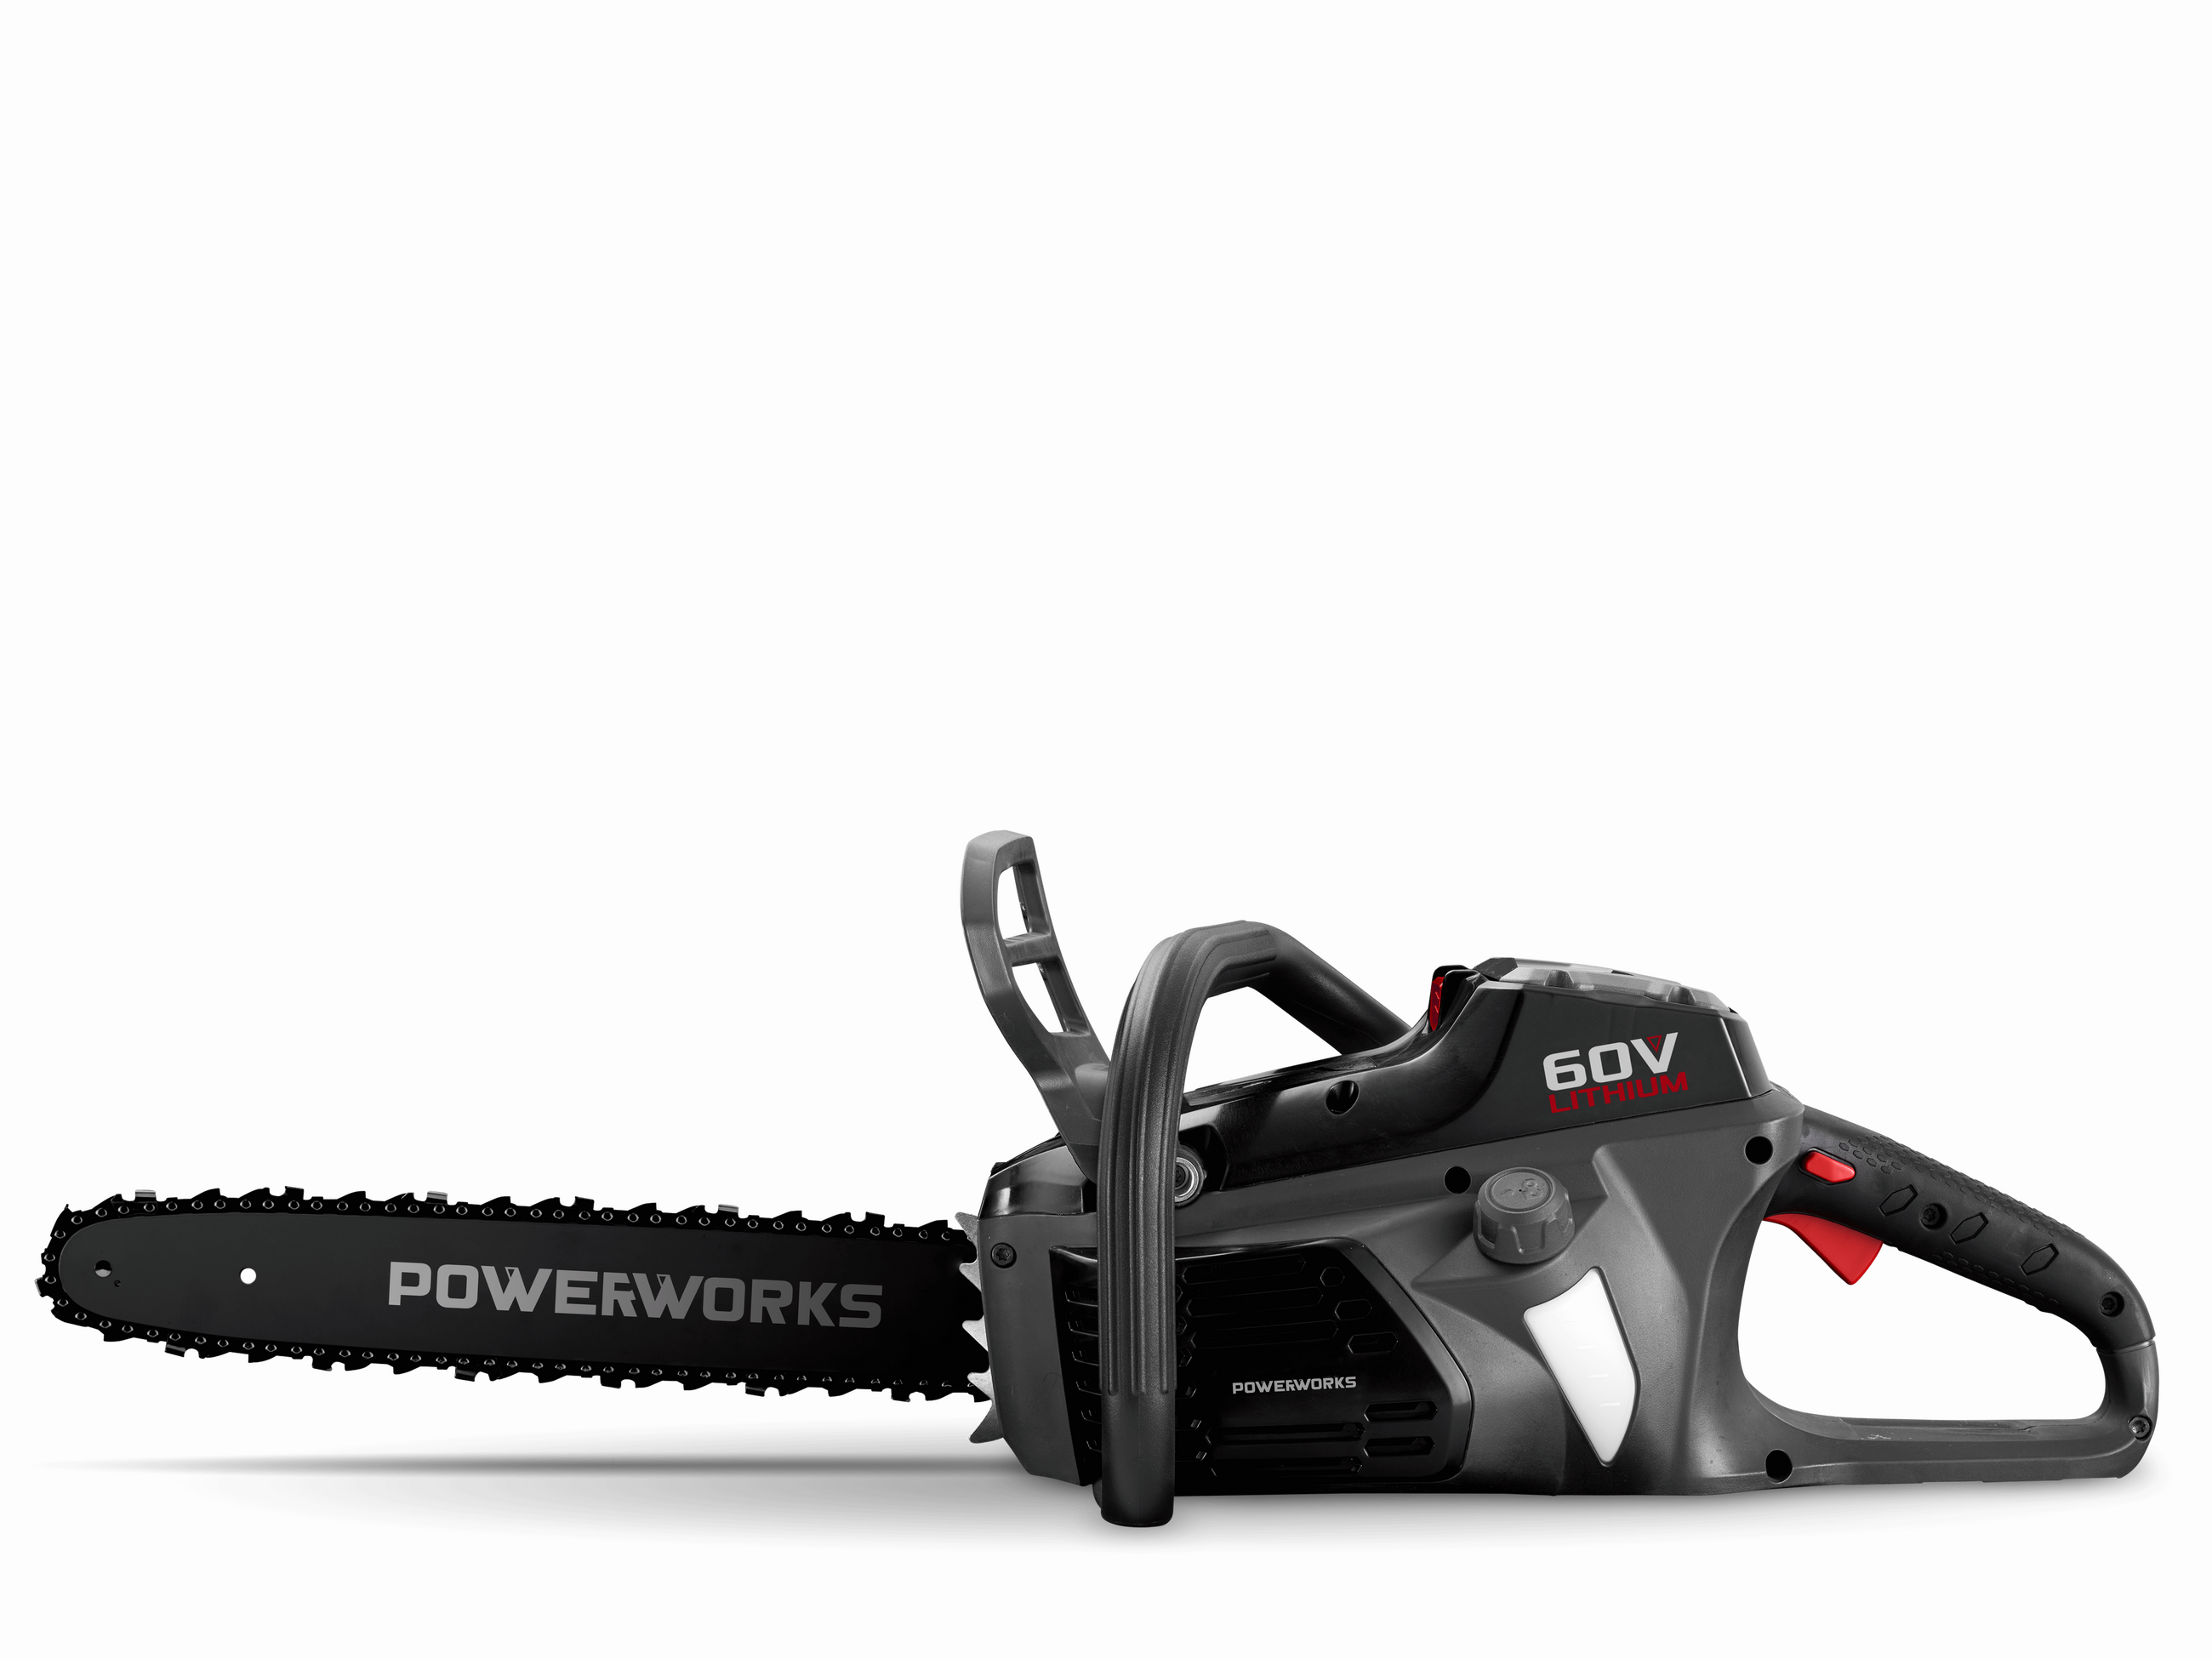 Image of Powerworks PD60CS40 chainsaw